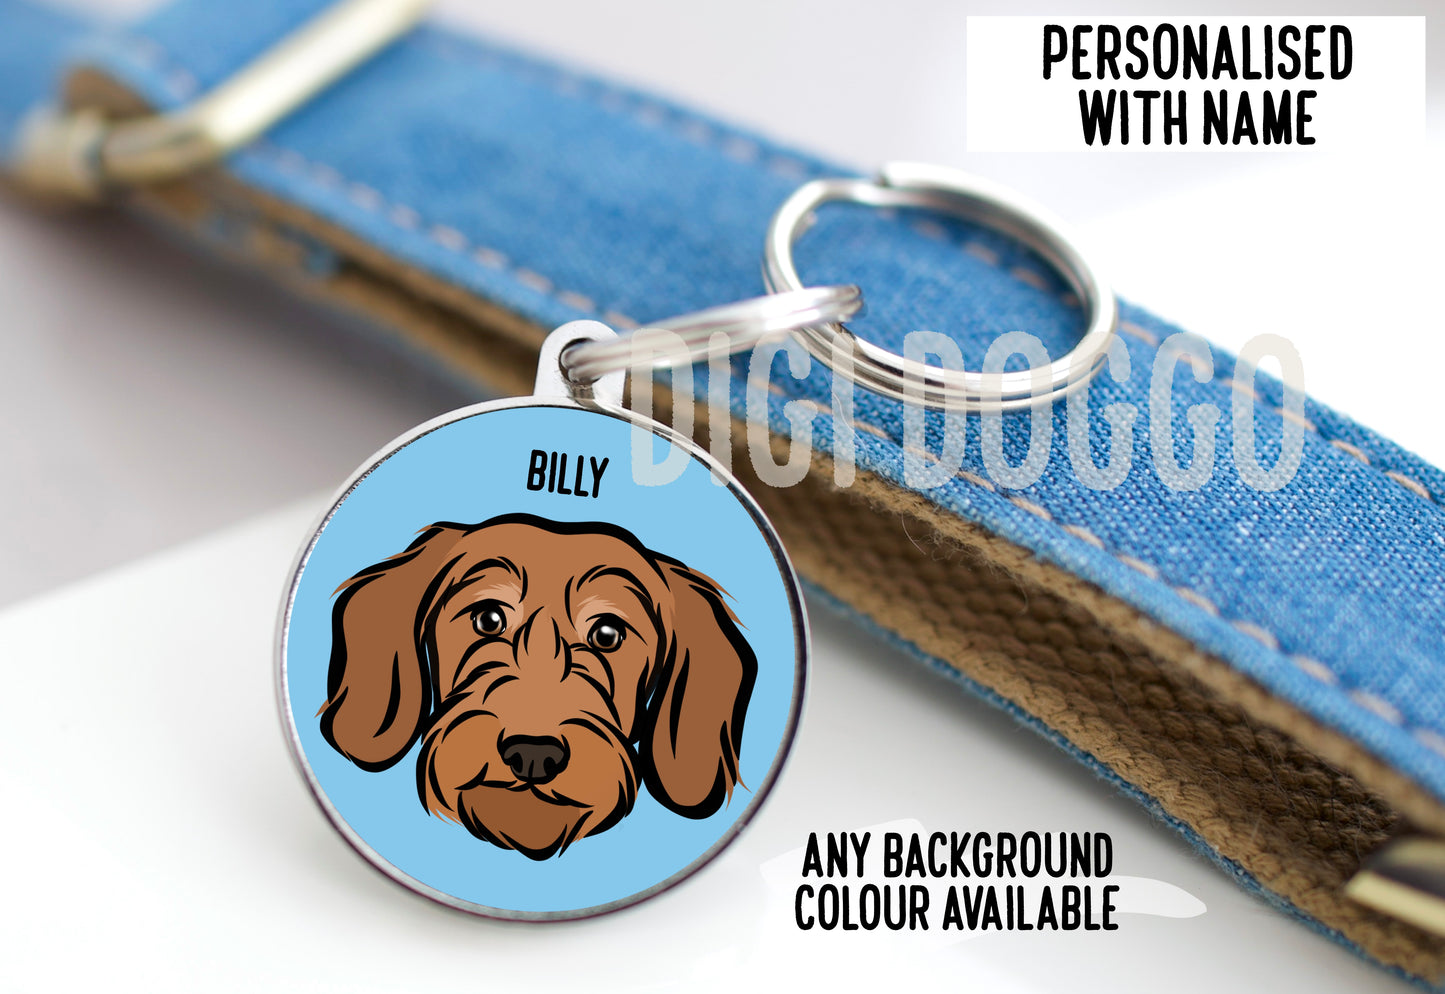 Wire Haired Dachshund ID Tag